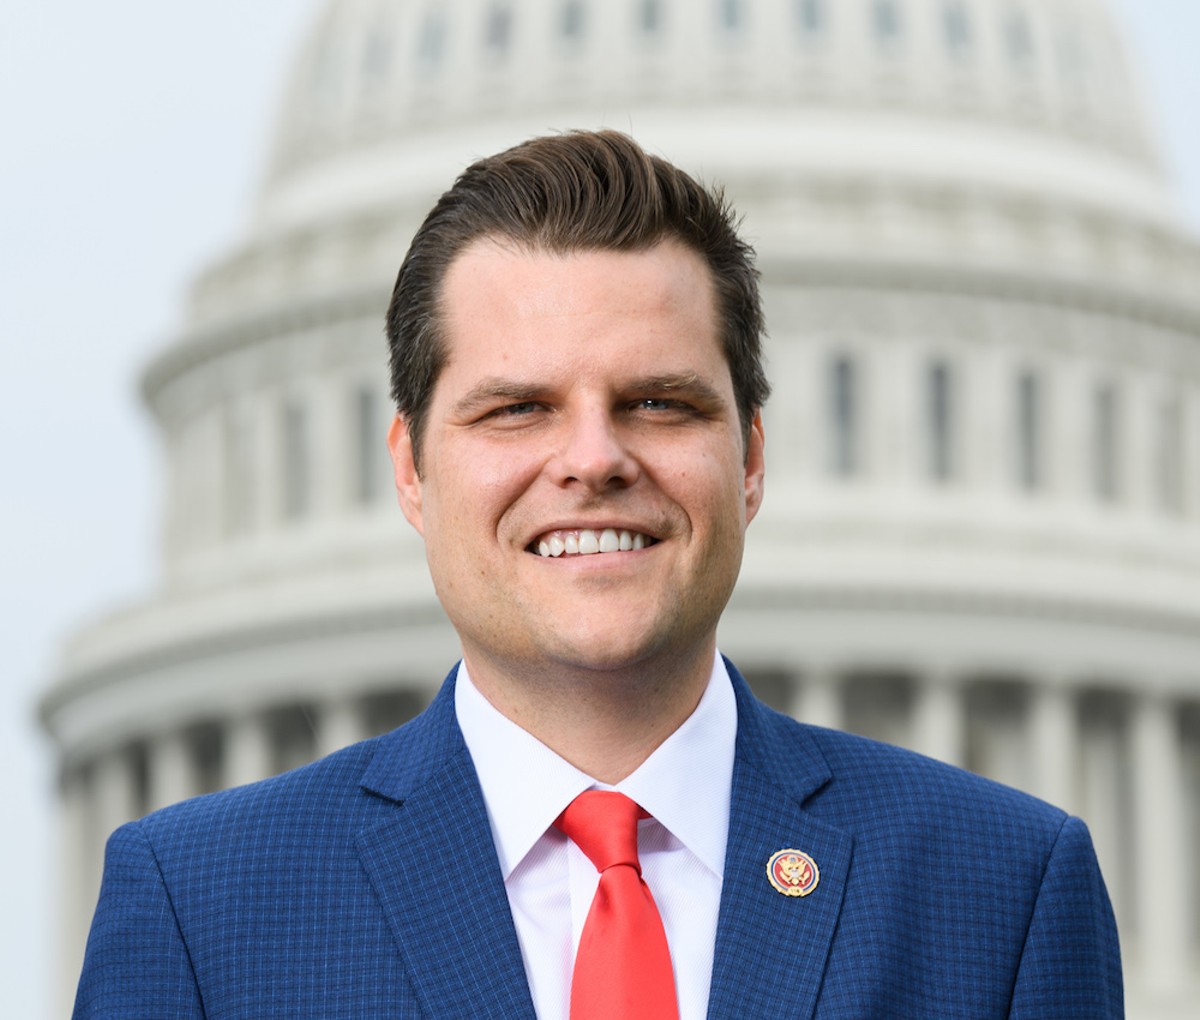 Matt Gaetz's milkshaker gets 15 days, Florida women fight for equal access to Florida strip clubs, and more news you might have missed